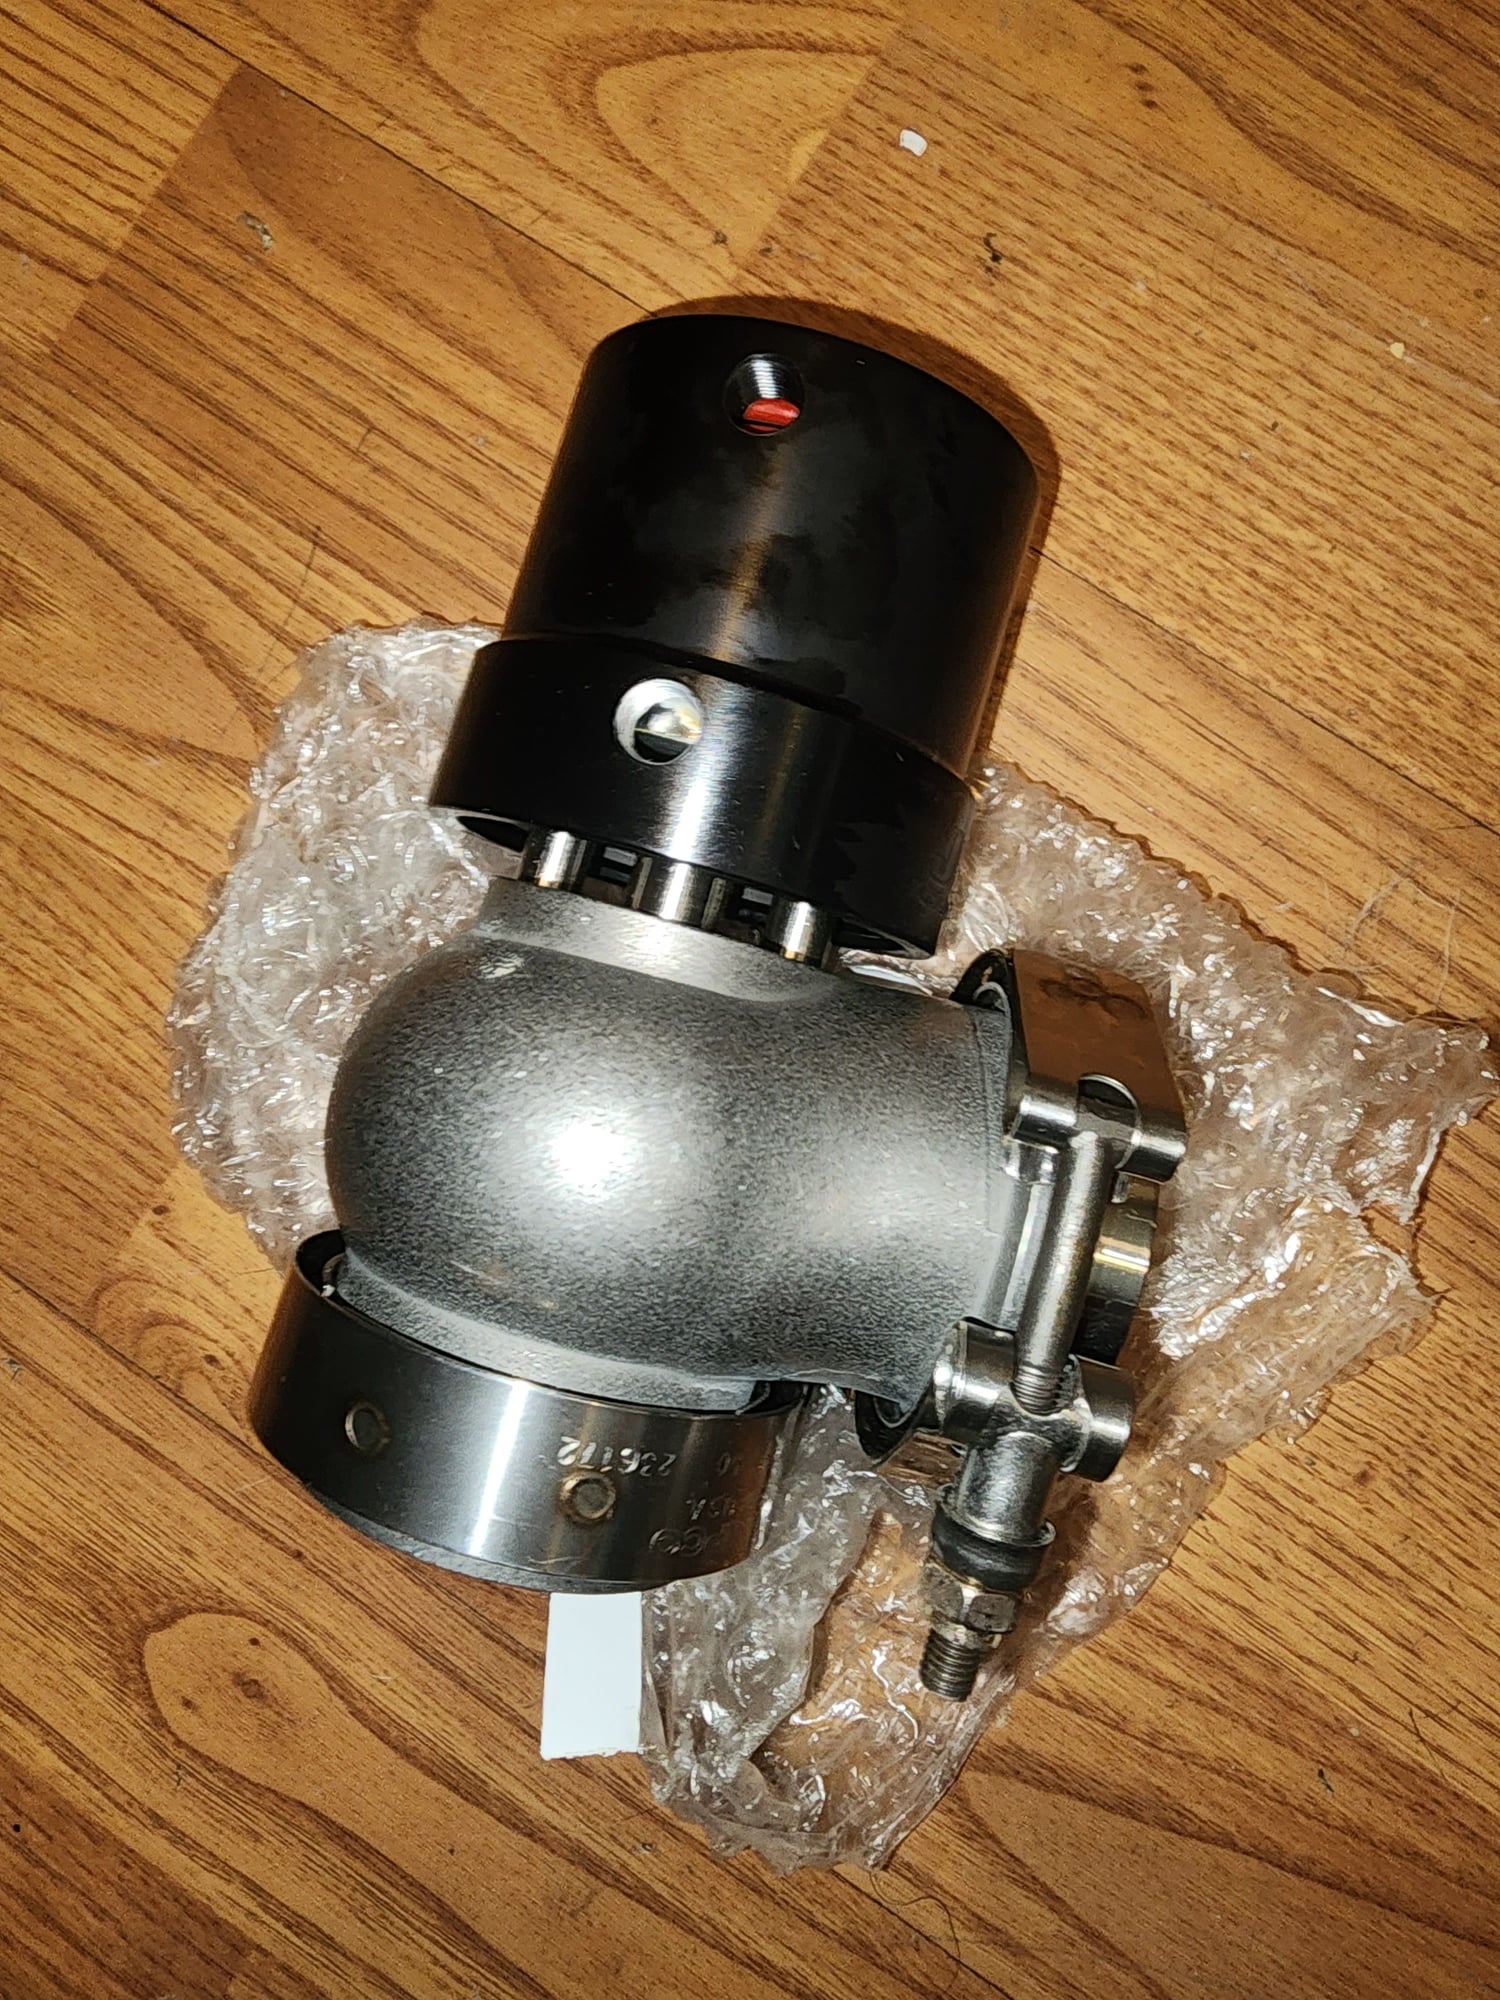 Accessories - New borgwarner s360 with extras - New - 1986 to 1994 Mazda RX-7 - Brigham City, UT 84302, United States